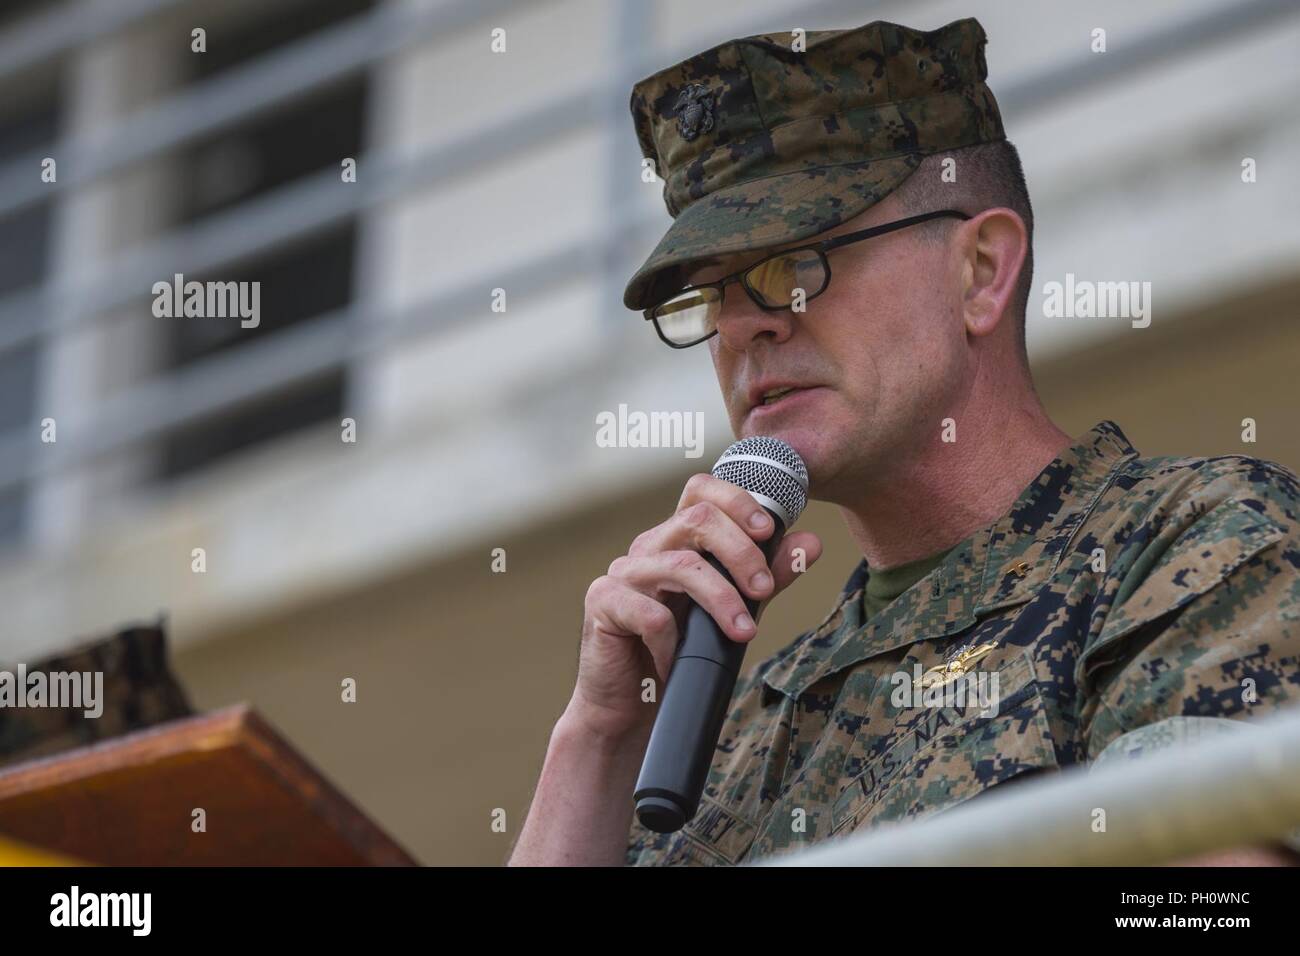 U.S. Navy Lt. Cmdr. Conrad T. Delaney, chaplain, 1st Light Armored Reconnaissance (LAR) Battalion (BN), 1st Marine Division, gives the invocation during the 1st LAR BN change of command ceremony at Marine Corps Base Camp Pendleton, Calif., June 21, 2018. The ceremony represents the official passing of authority from the offgoing commander, Lt. Col. Michael R. Nakonieczny, to the incoming commander, Lt. Col. Dominique B. Neal. Stock Photo